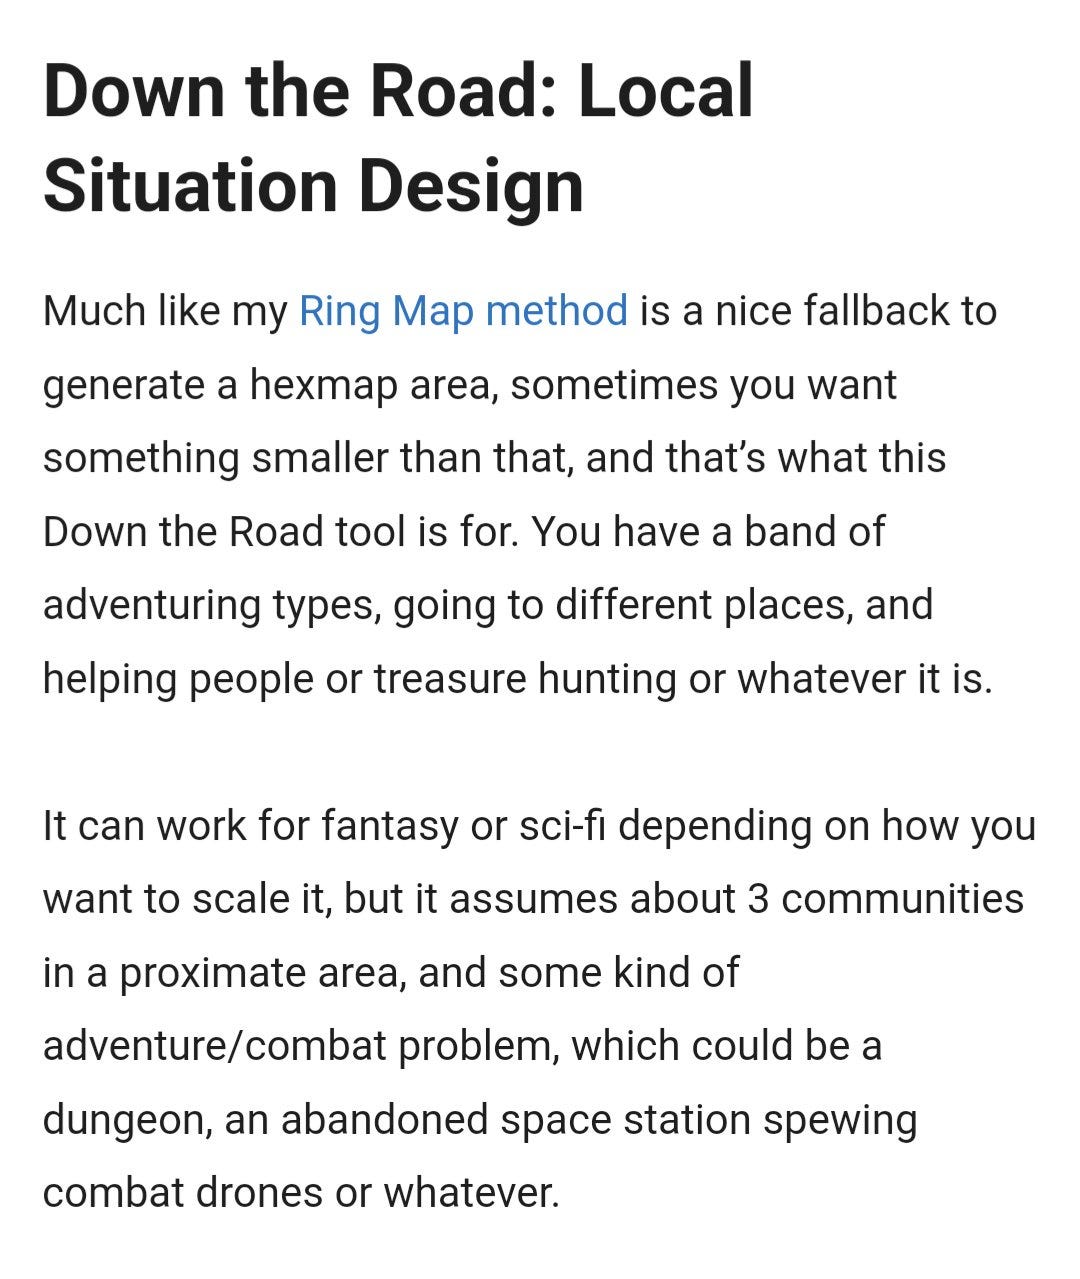 Down the Road: Local Situation Design

Much like my Ring Map method is a nice fallback to generate a hexmap area, sometimes you want something smaller than that, and that’s what this Down the Road tool is for. You have a band of adventuring types, going to different places, and helping people or treasure hunting or whatever it is.

It can work for fantasy or sci-fi depending on how you want to scale it, but it assumes about 3 communities in a proximate area, and some kind of adventure/combat problem, which could be a dungeon, an abandoned space station spewing combat drones or whatever.